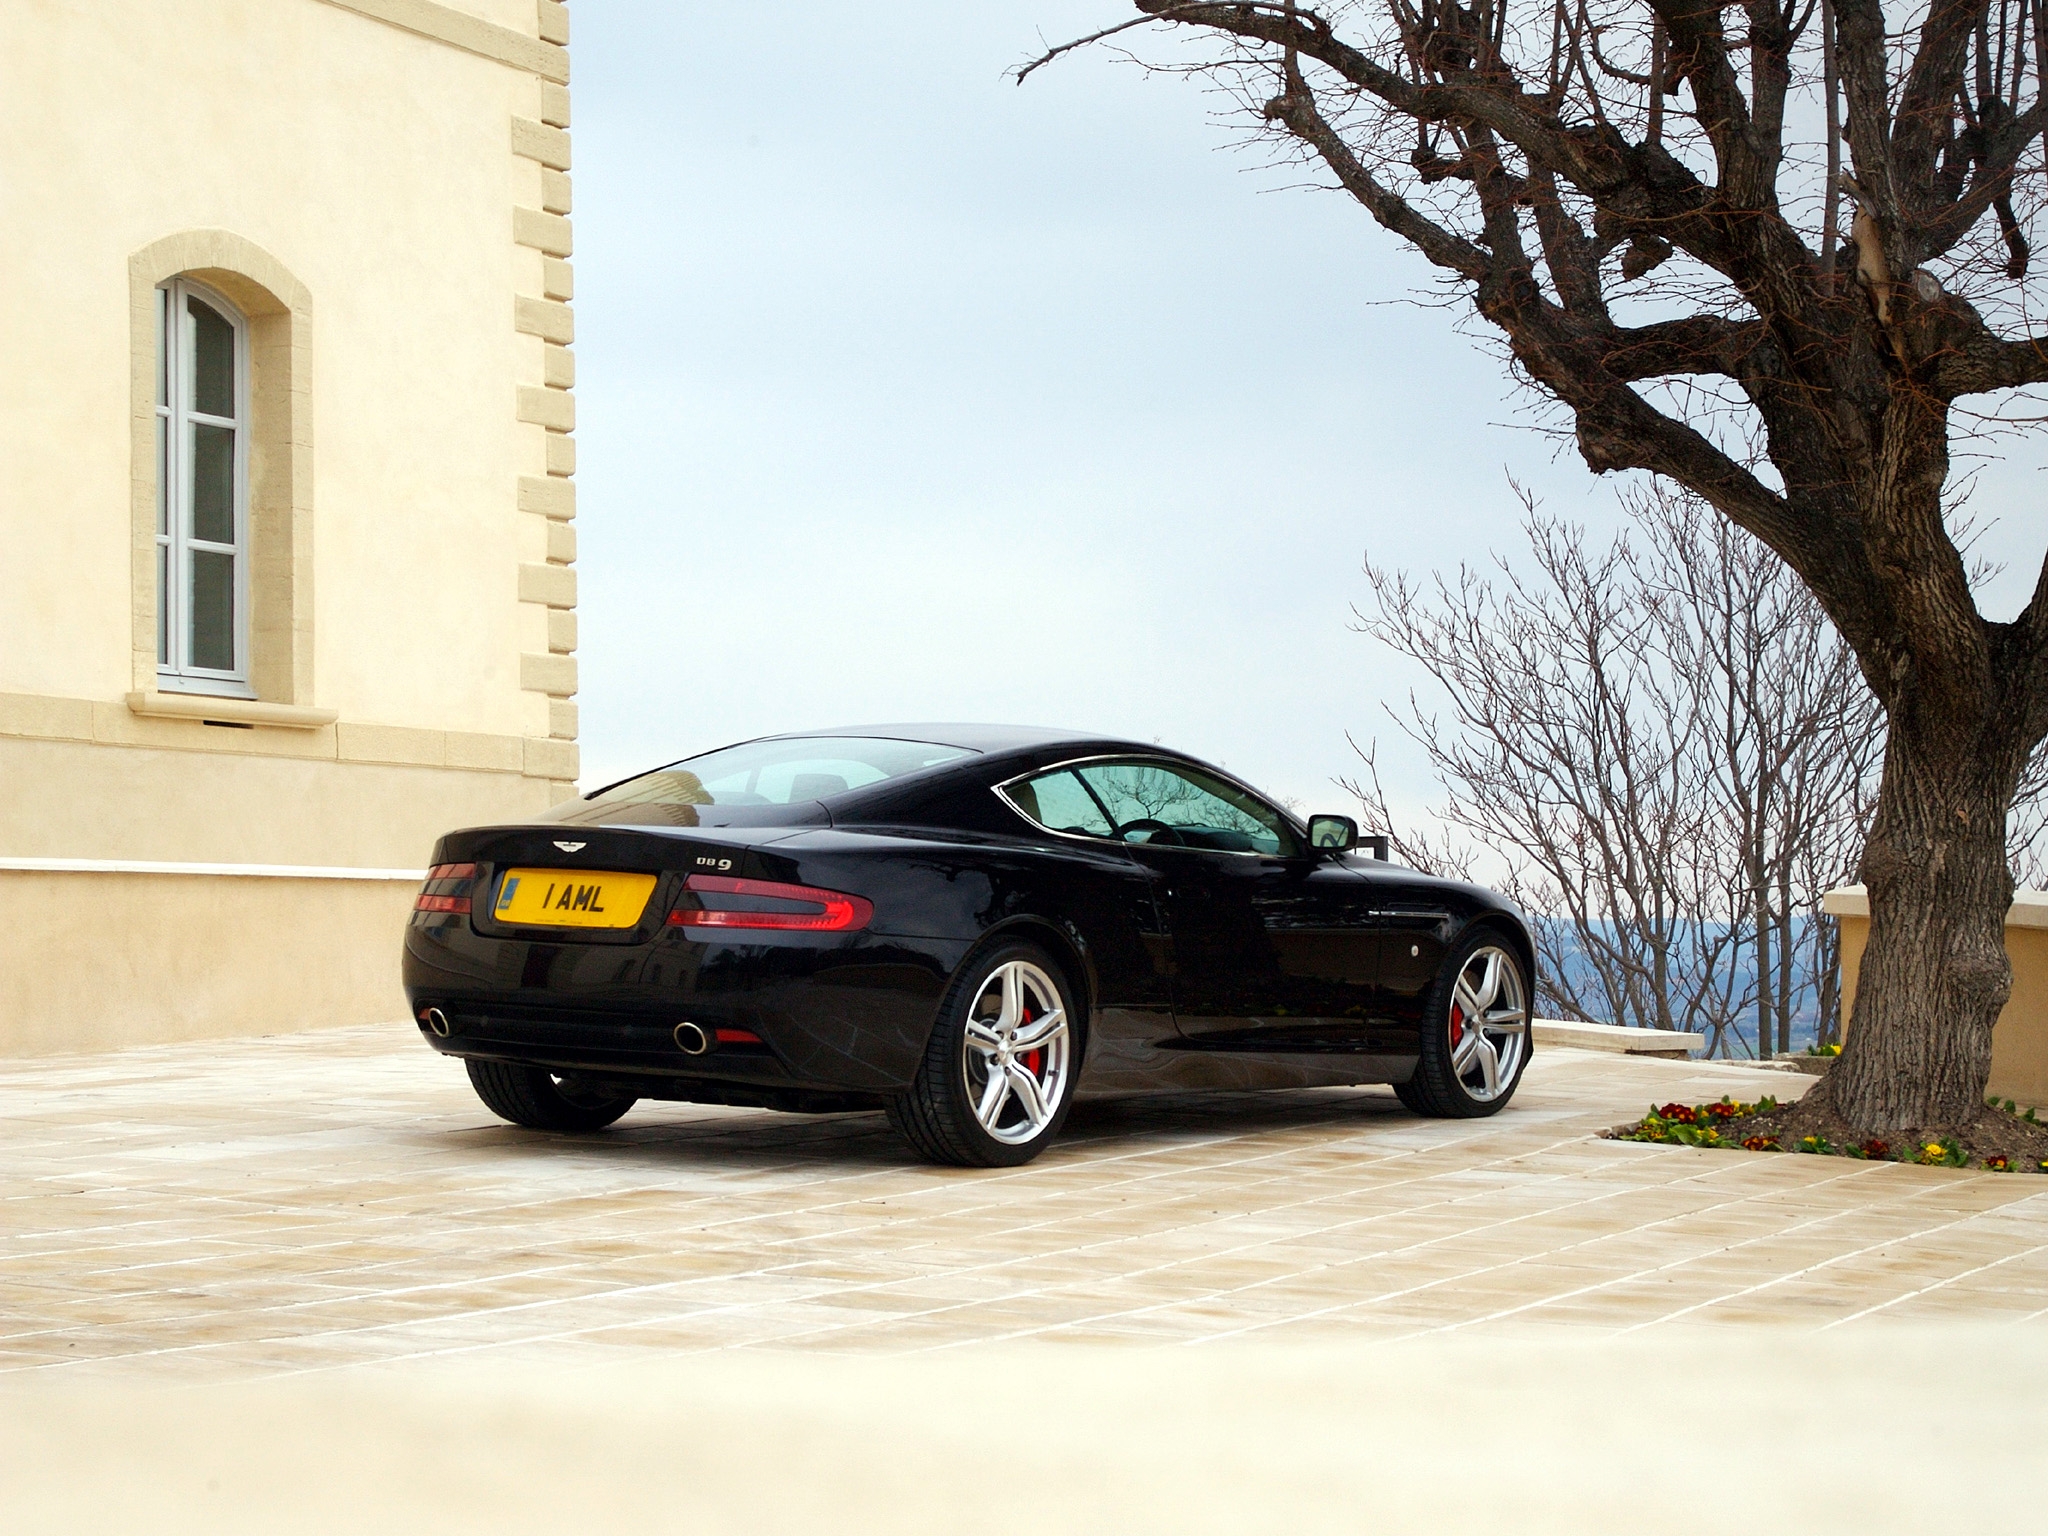 88605 download wallpaper sports, auto, sky, aston martin, cars, black, building, wood, tree, side view, style, db9, 2006 screensavers and pictures for free